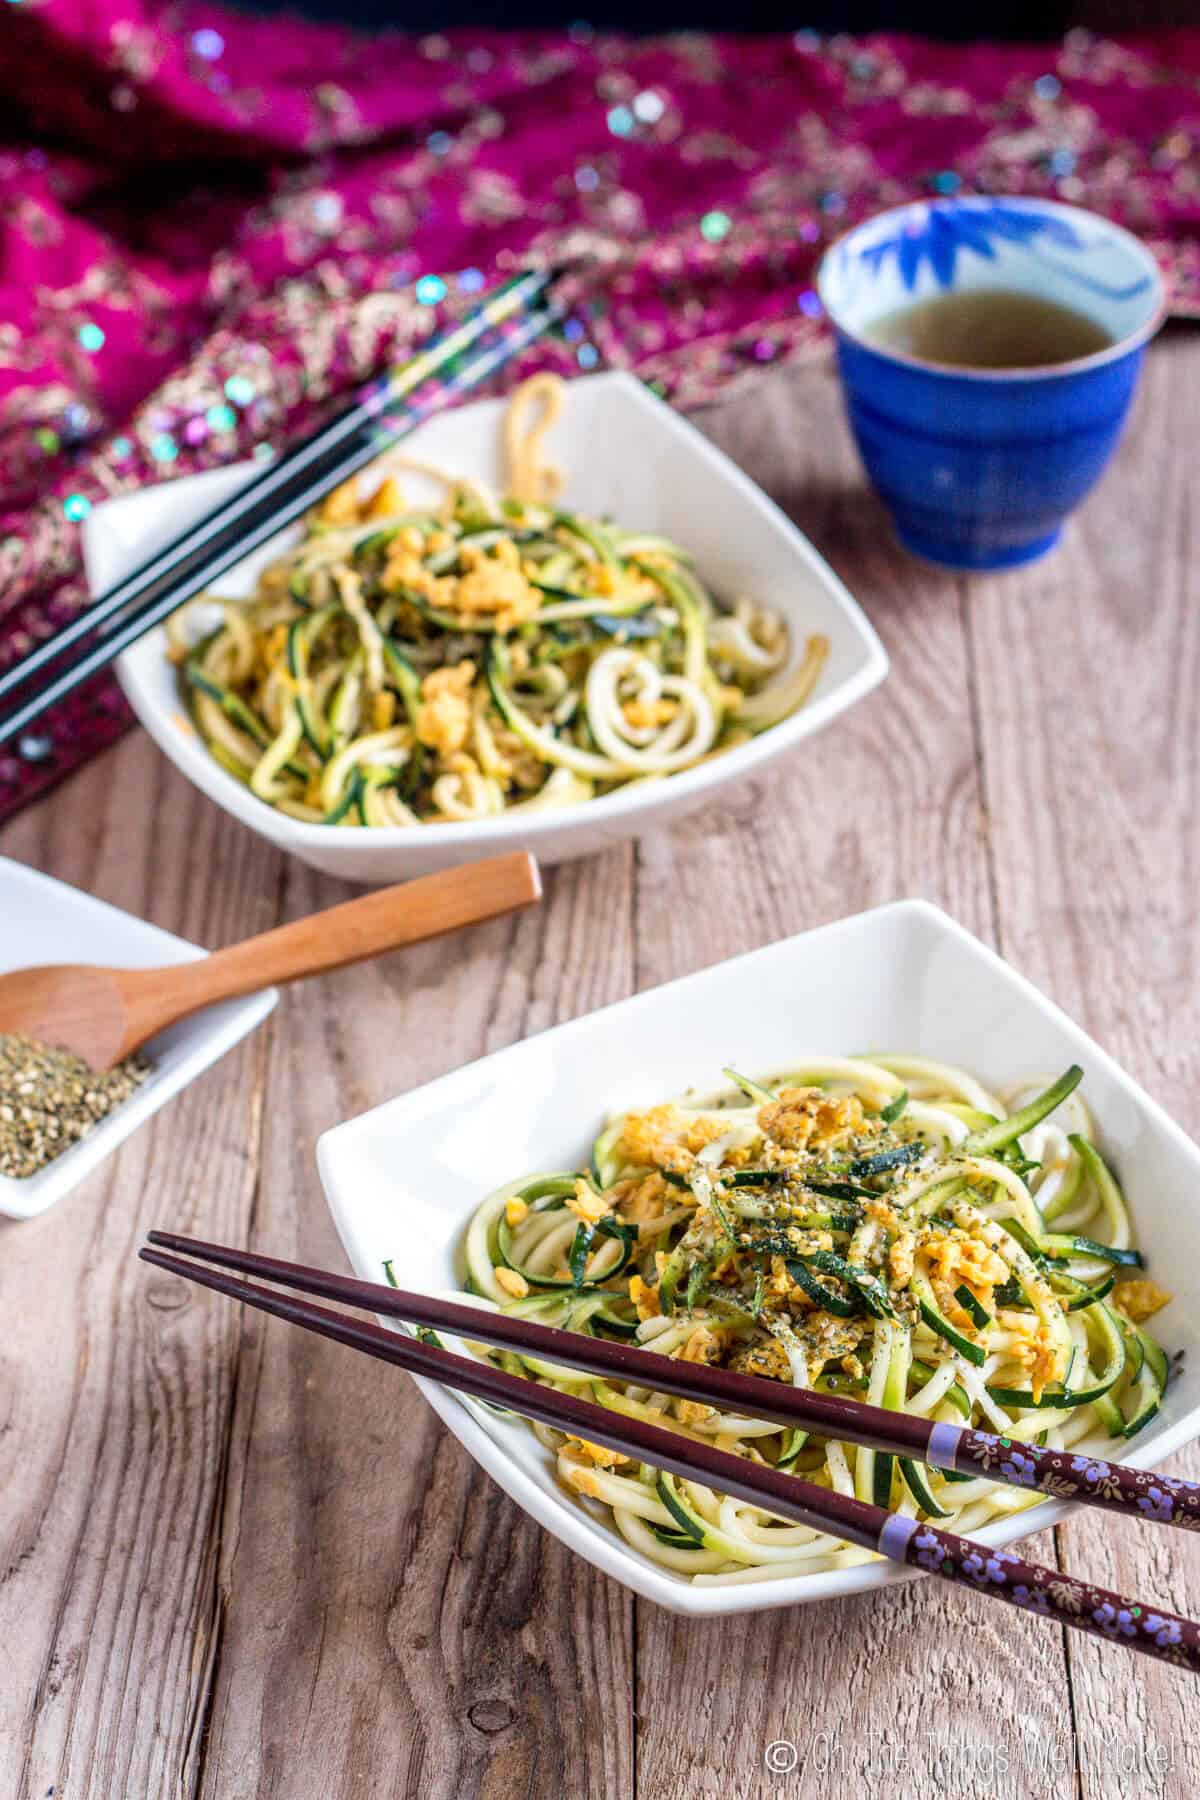 Recipe for Asian Fried Zucchini Noodles - Oh, The Things We'll Make!